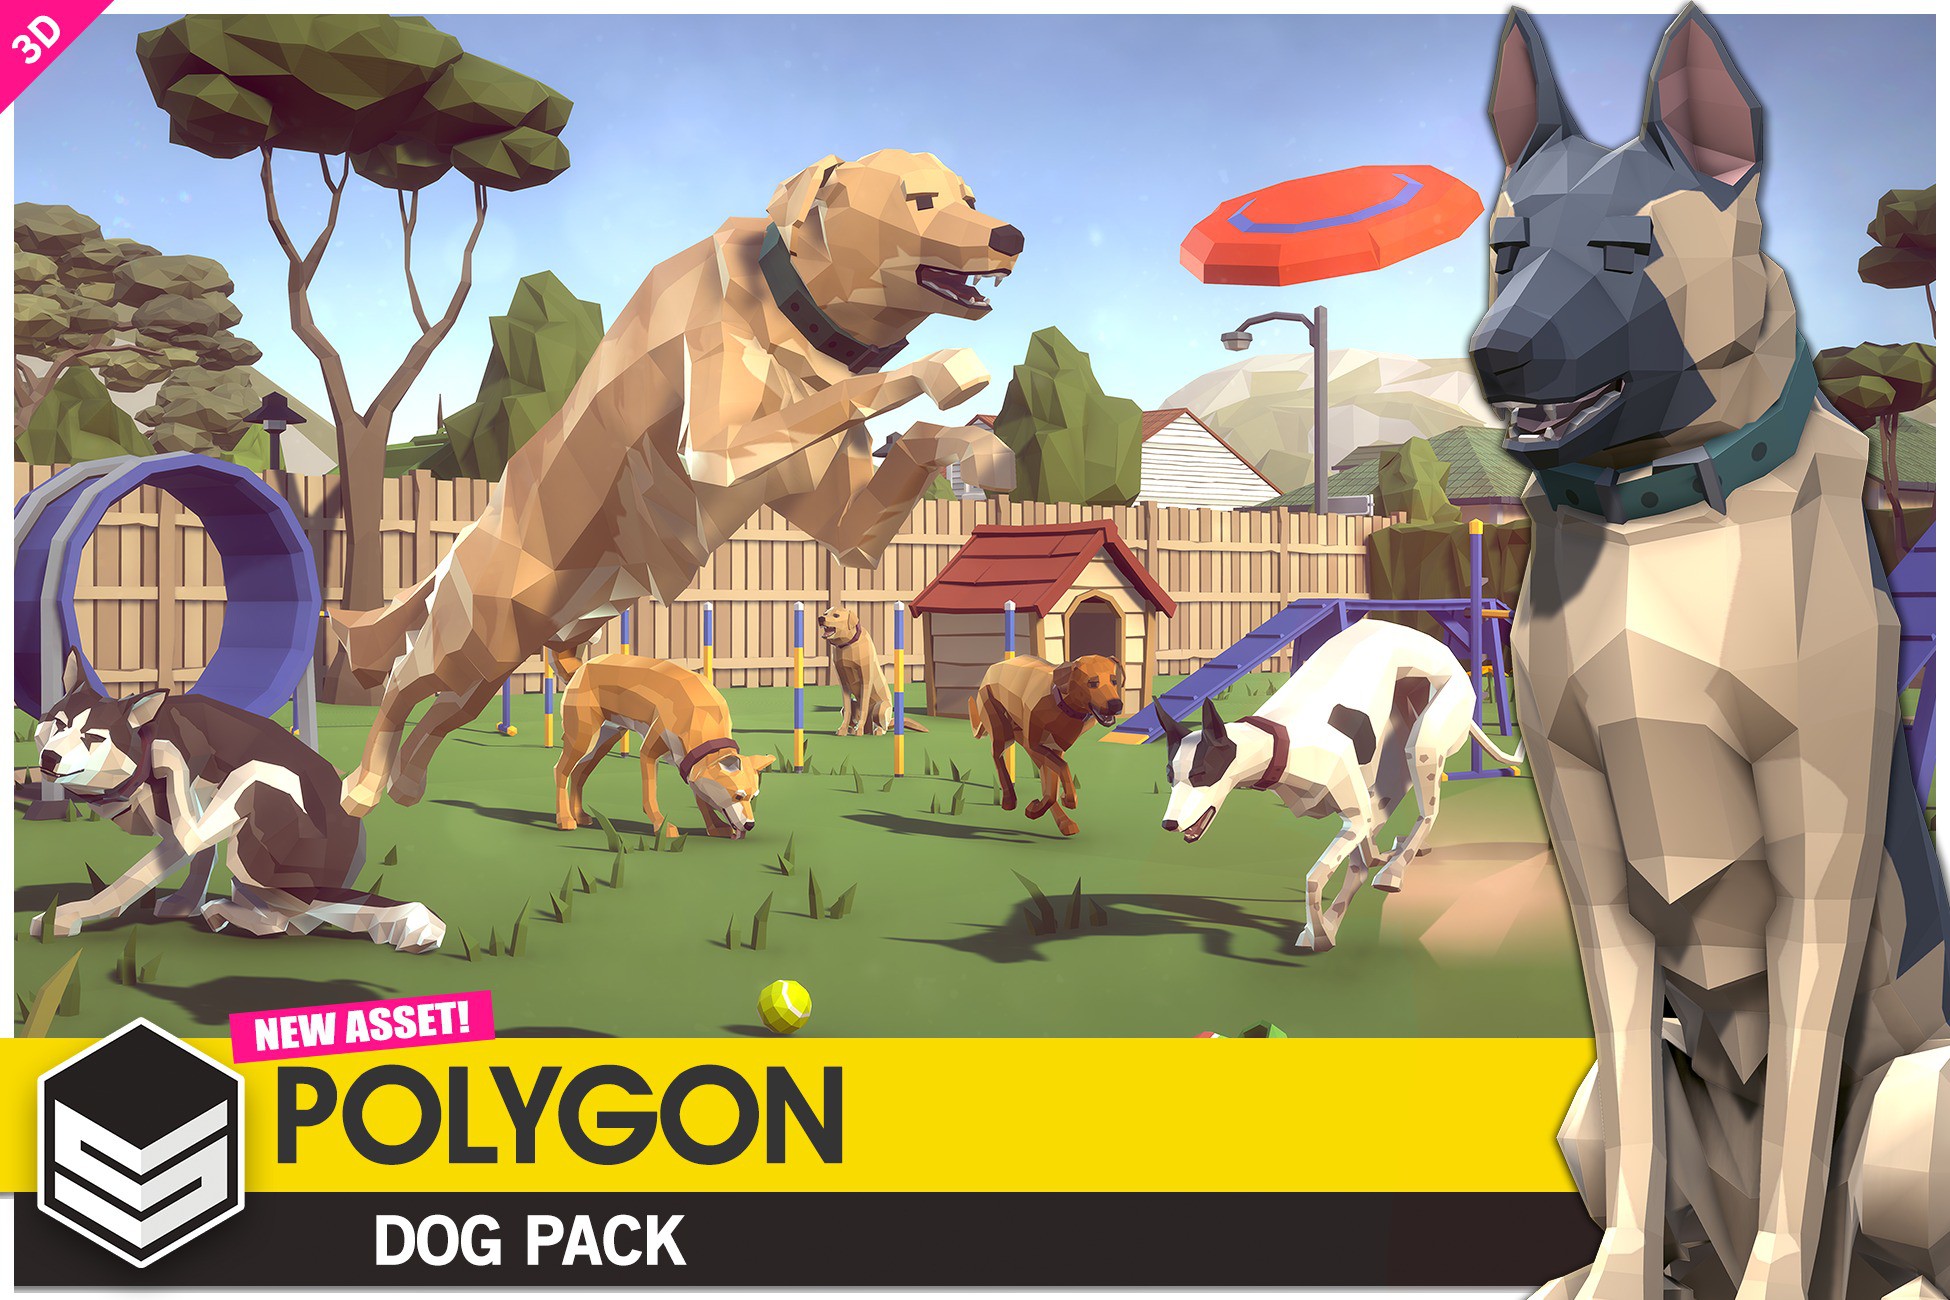 add 3d dog models to your next unity game with these prefab models